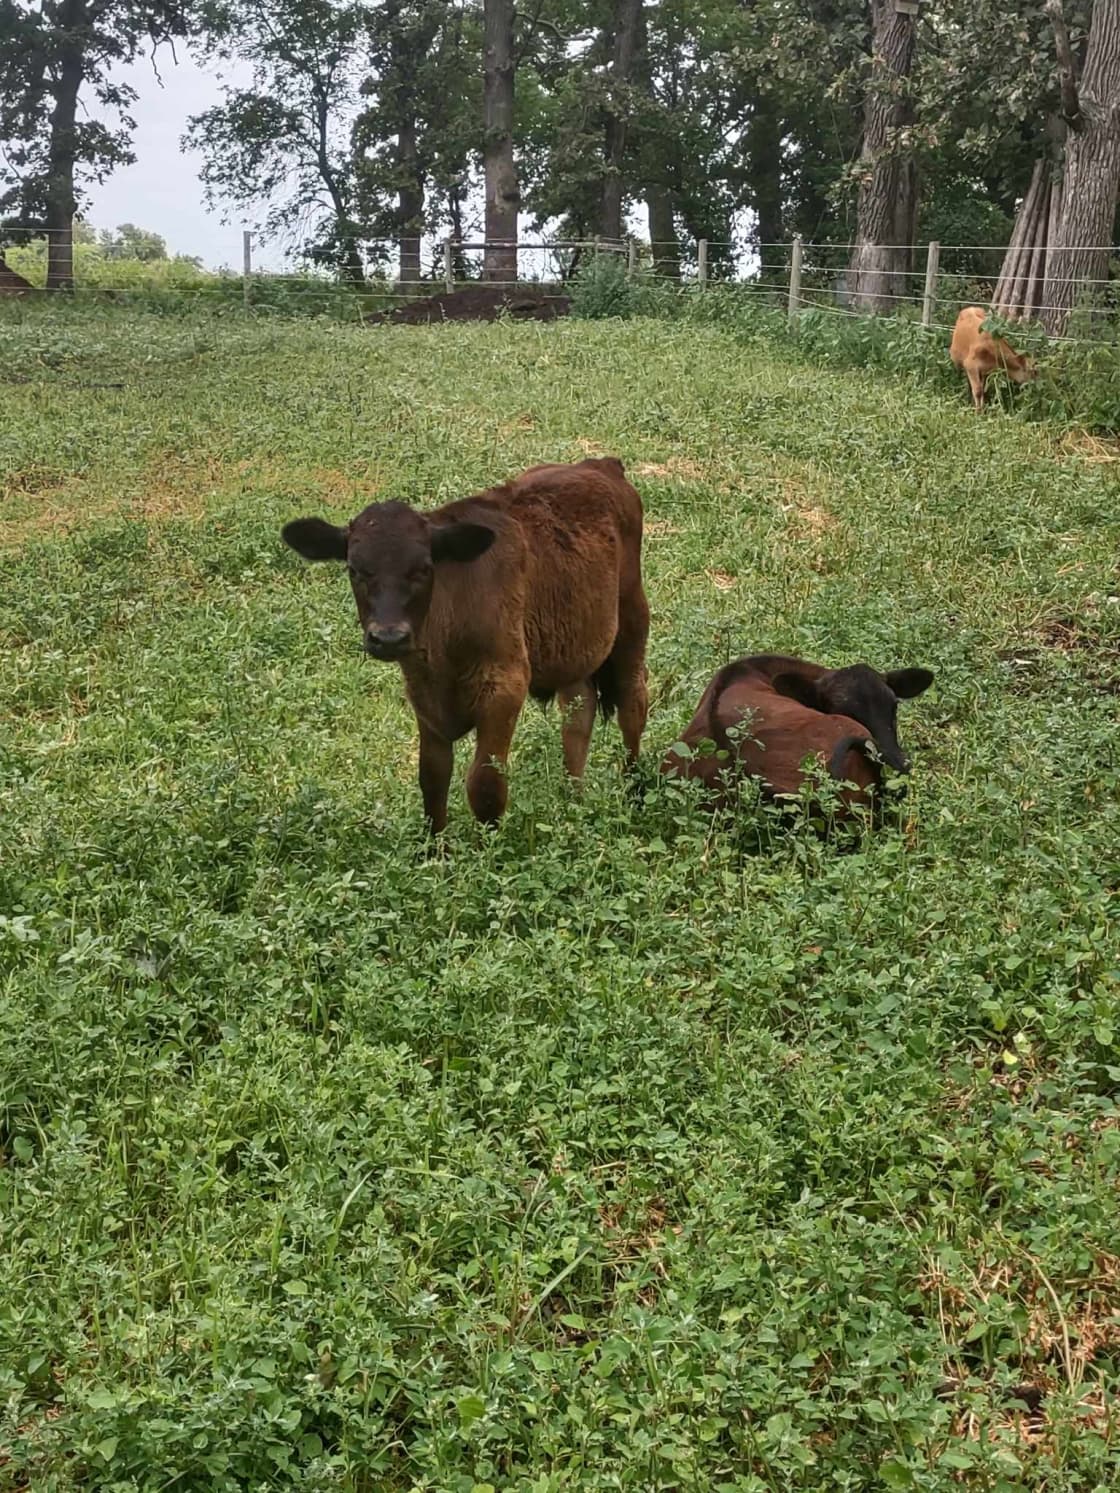 Adorable little cows on the property!